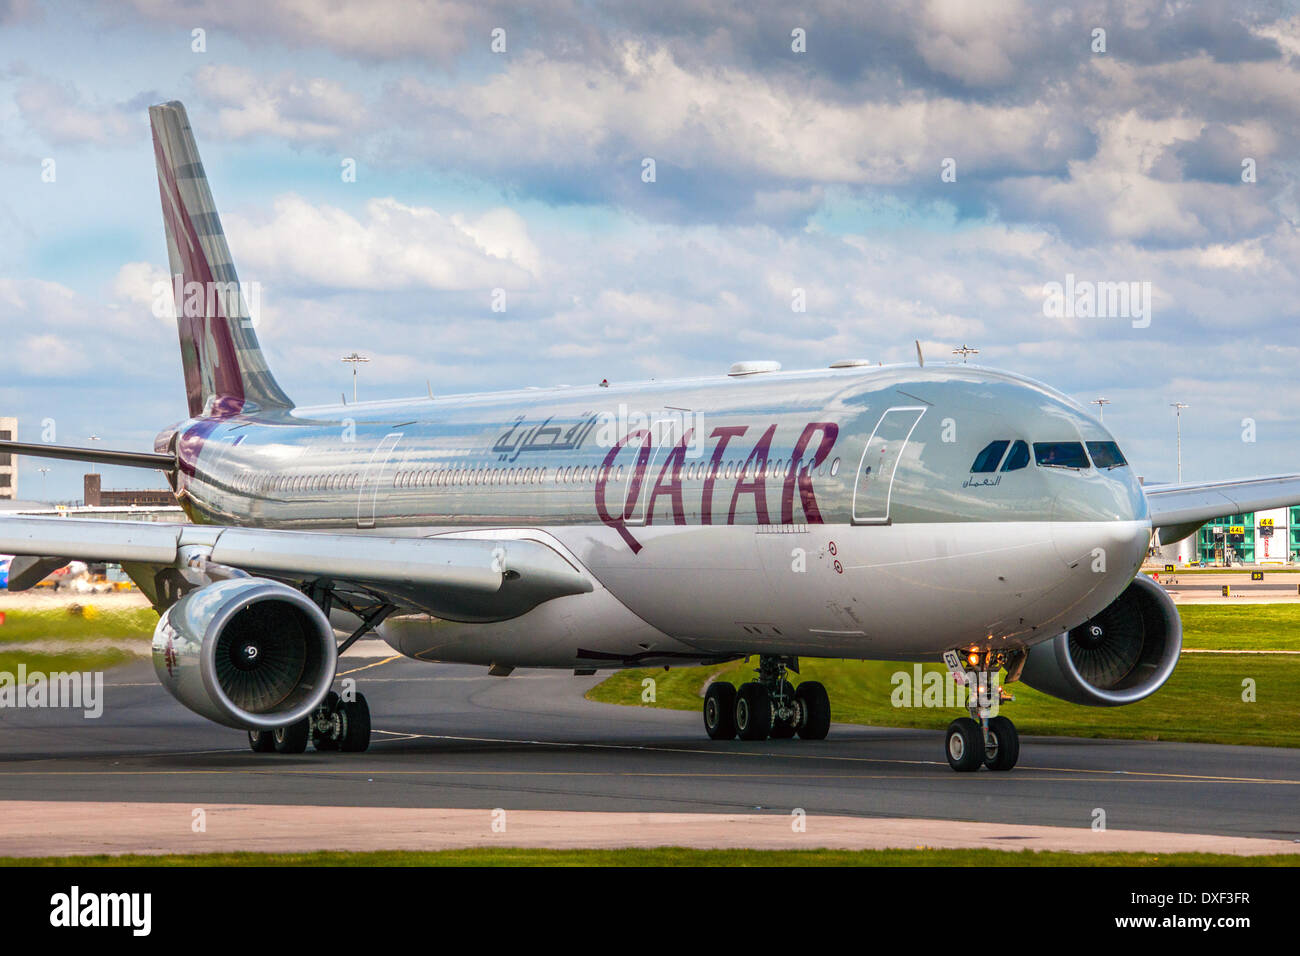 A qatar airways airbus A330 -300 taxi-ing at manchester airport 2012 Stock Photo